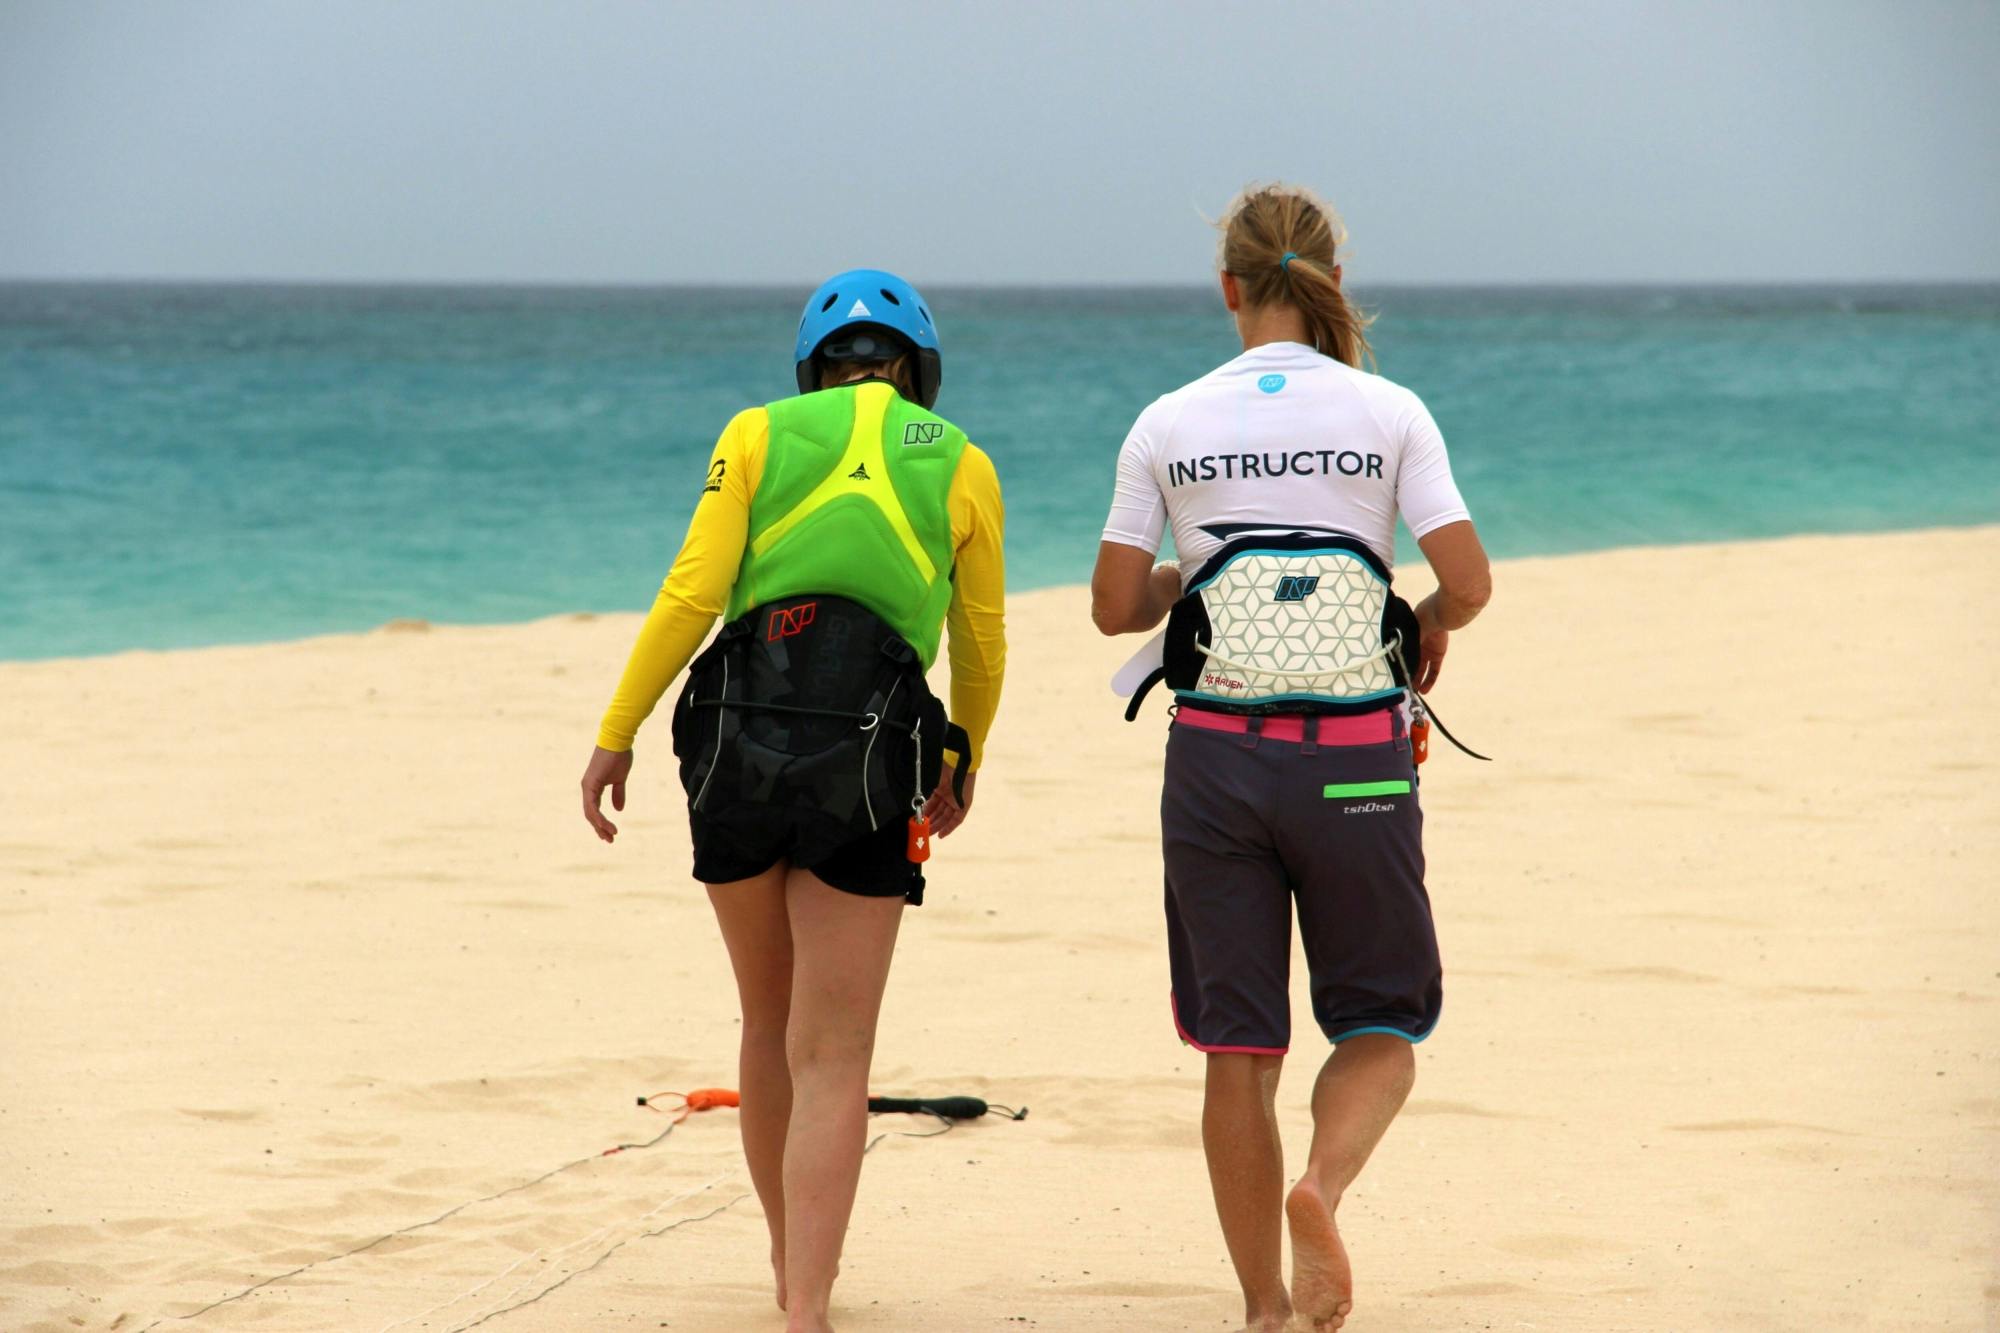 Cape Verde Kite Surfing Lesson with Atlantic Star